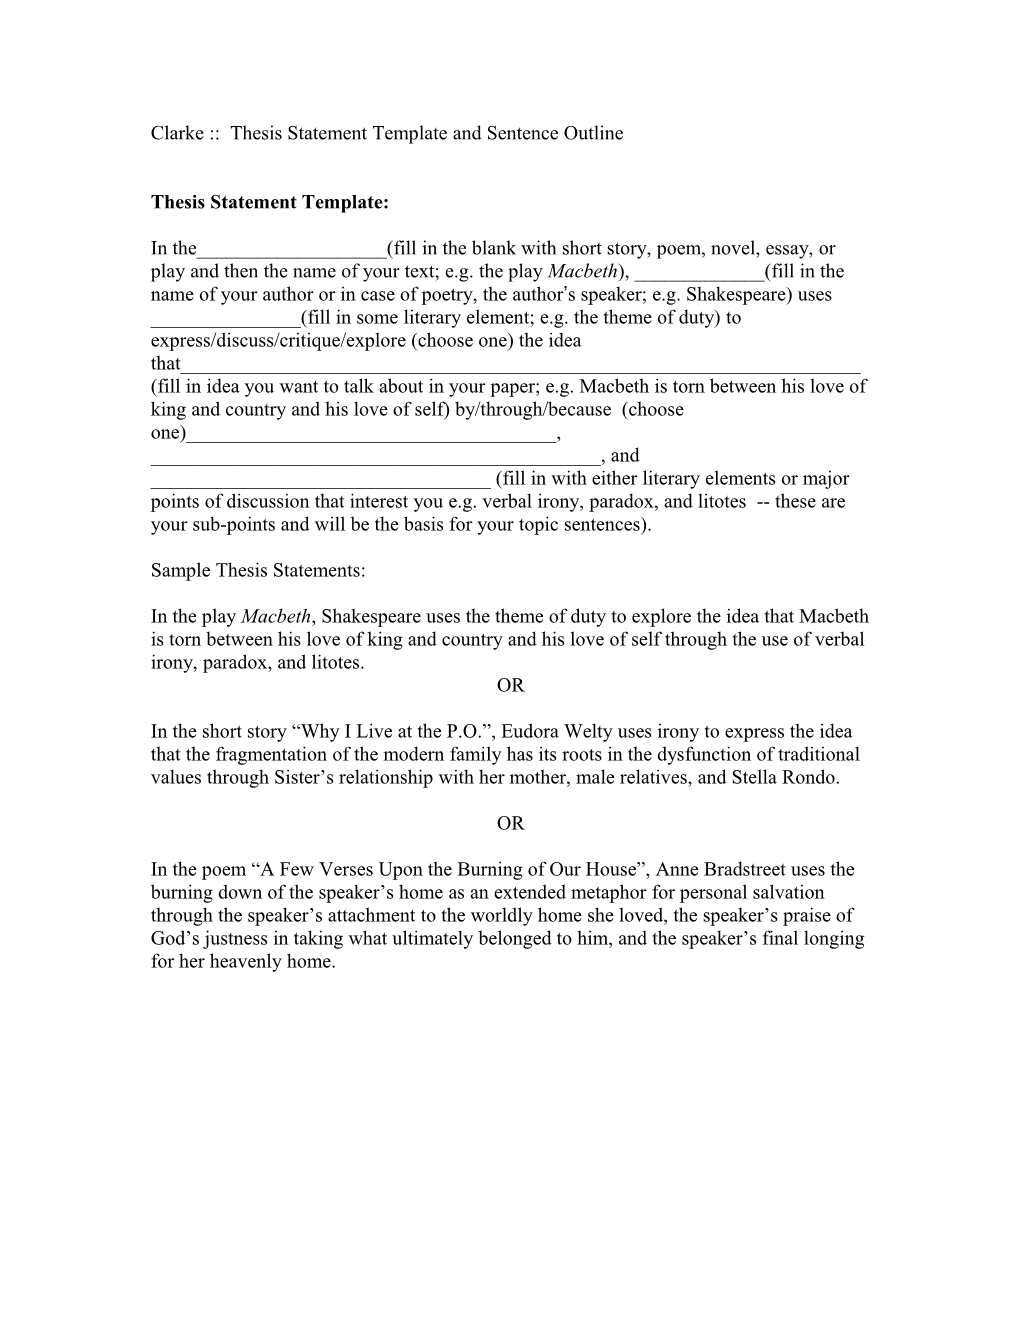 Thesis Statement Template and Sentence Outline